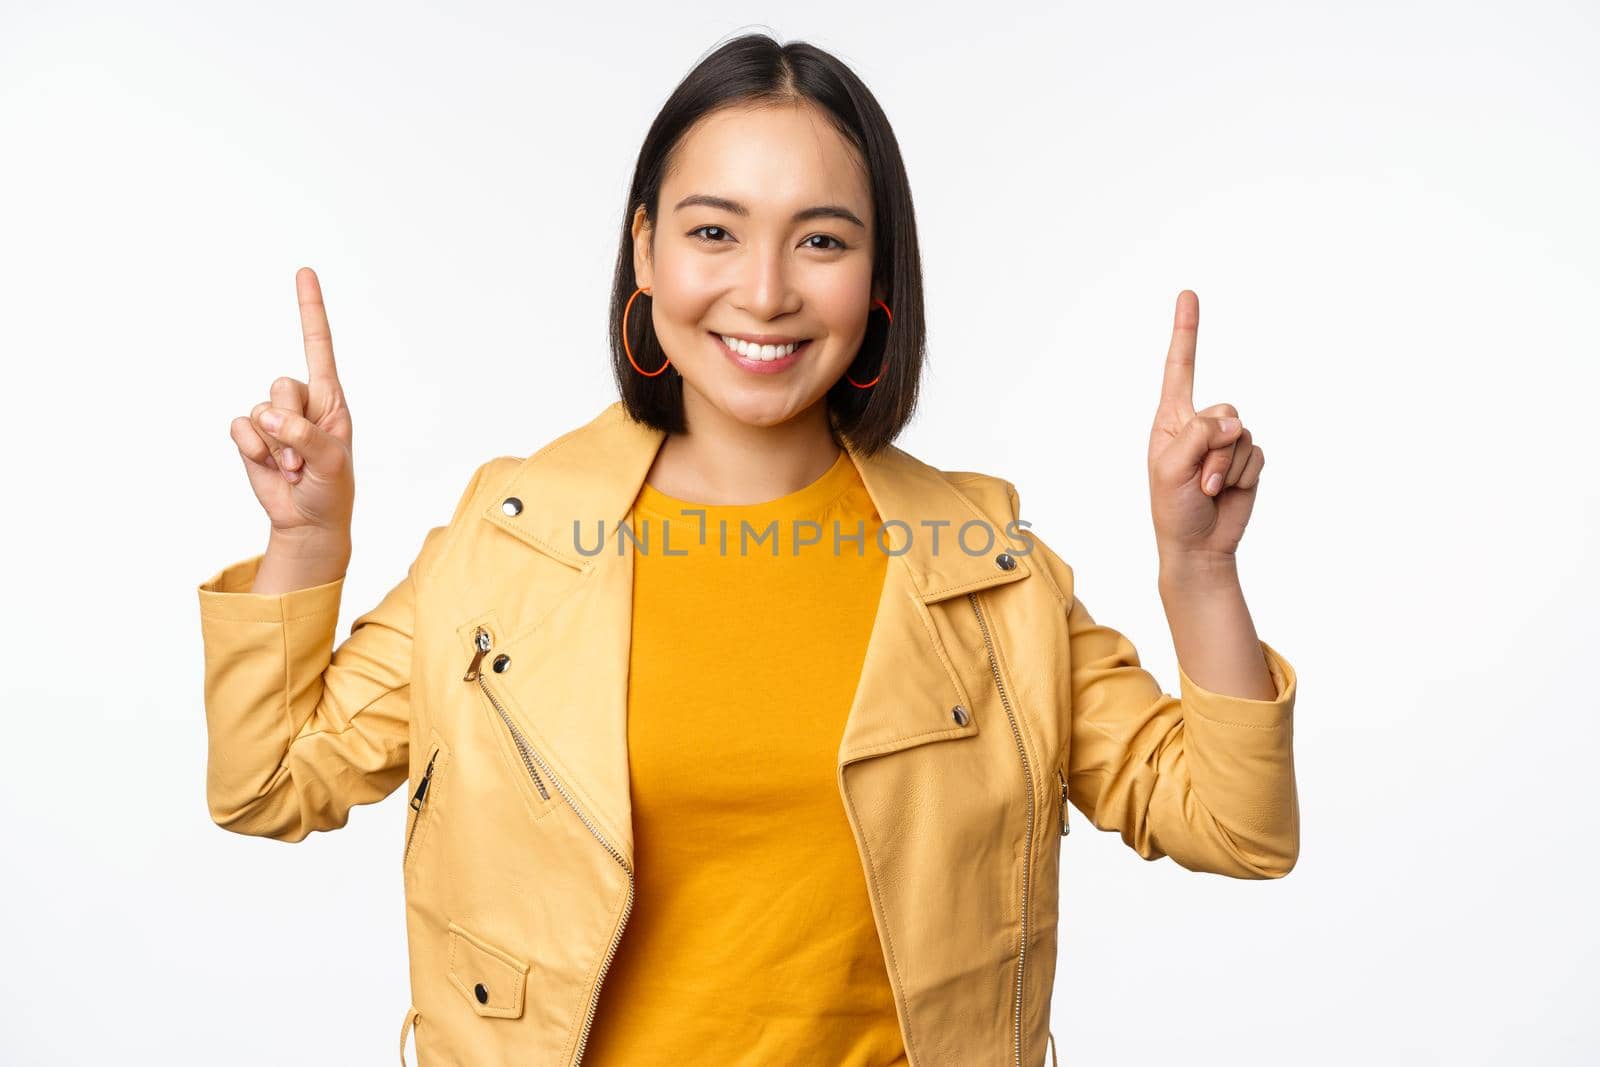 Enthusiastic asian girl pointing fingers up, showing advertisement on top, smiling happy, demonstrating promo offer or banner, standing over white background.